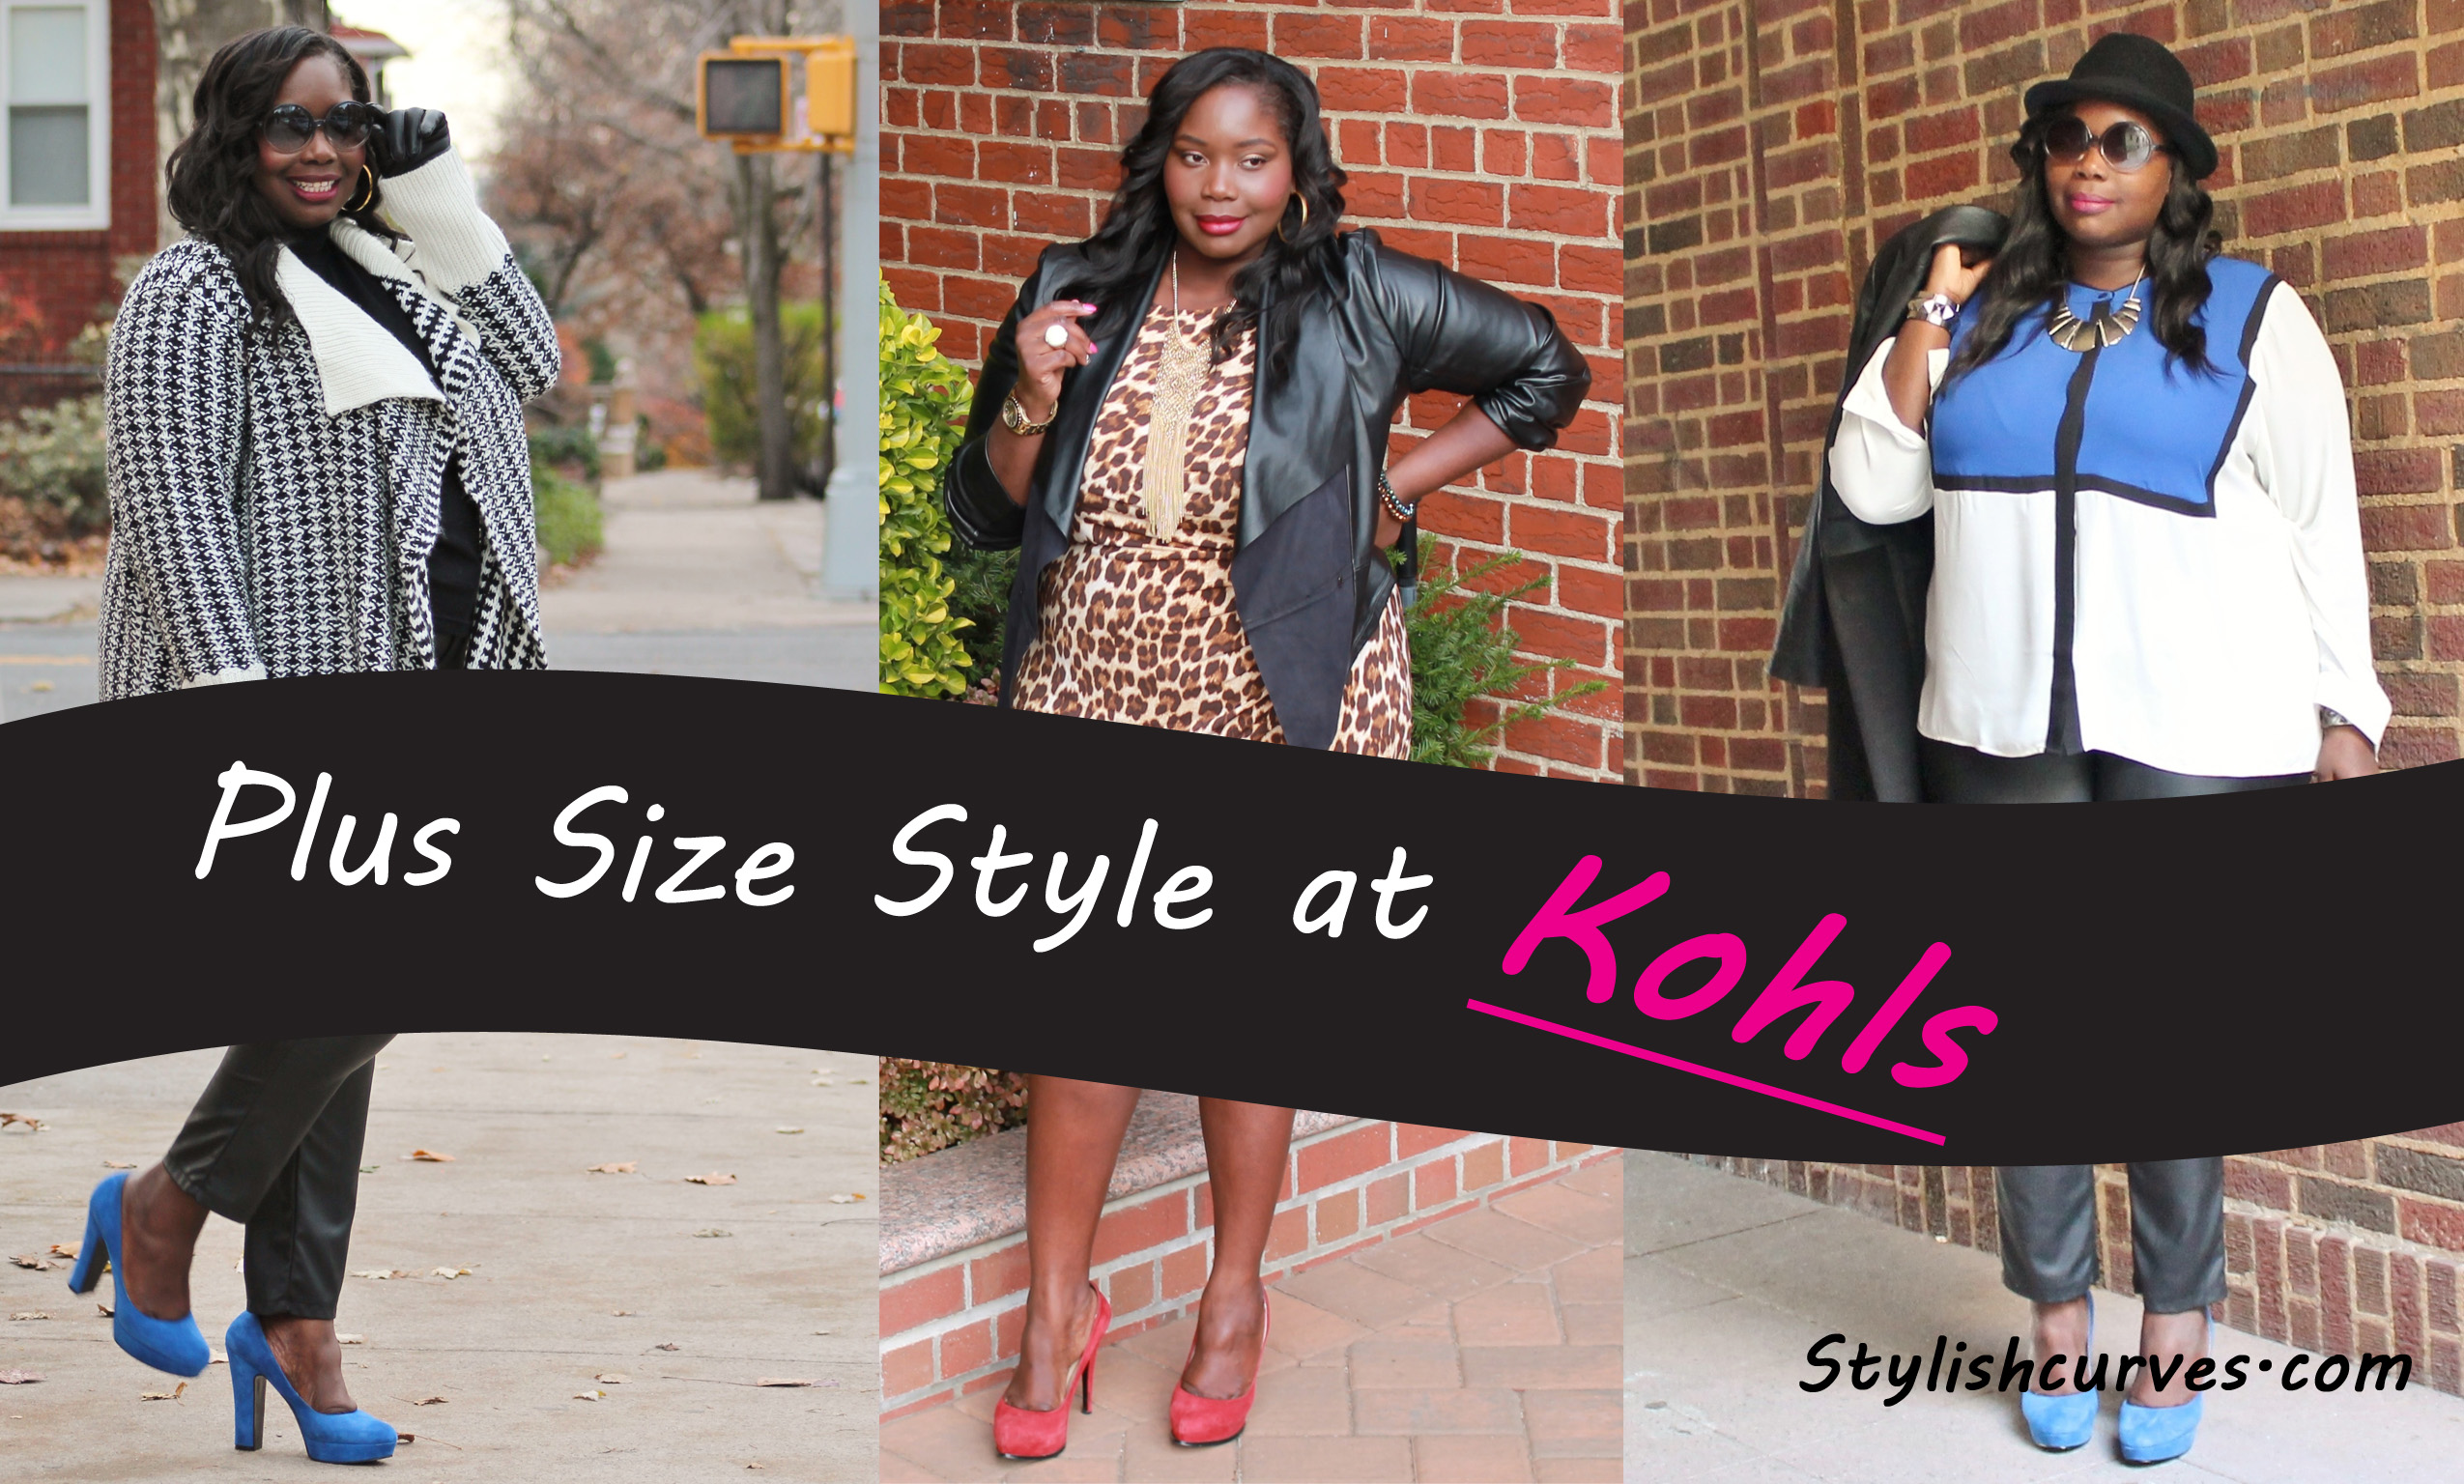 Kohl's early fall in-store try-on